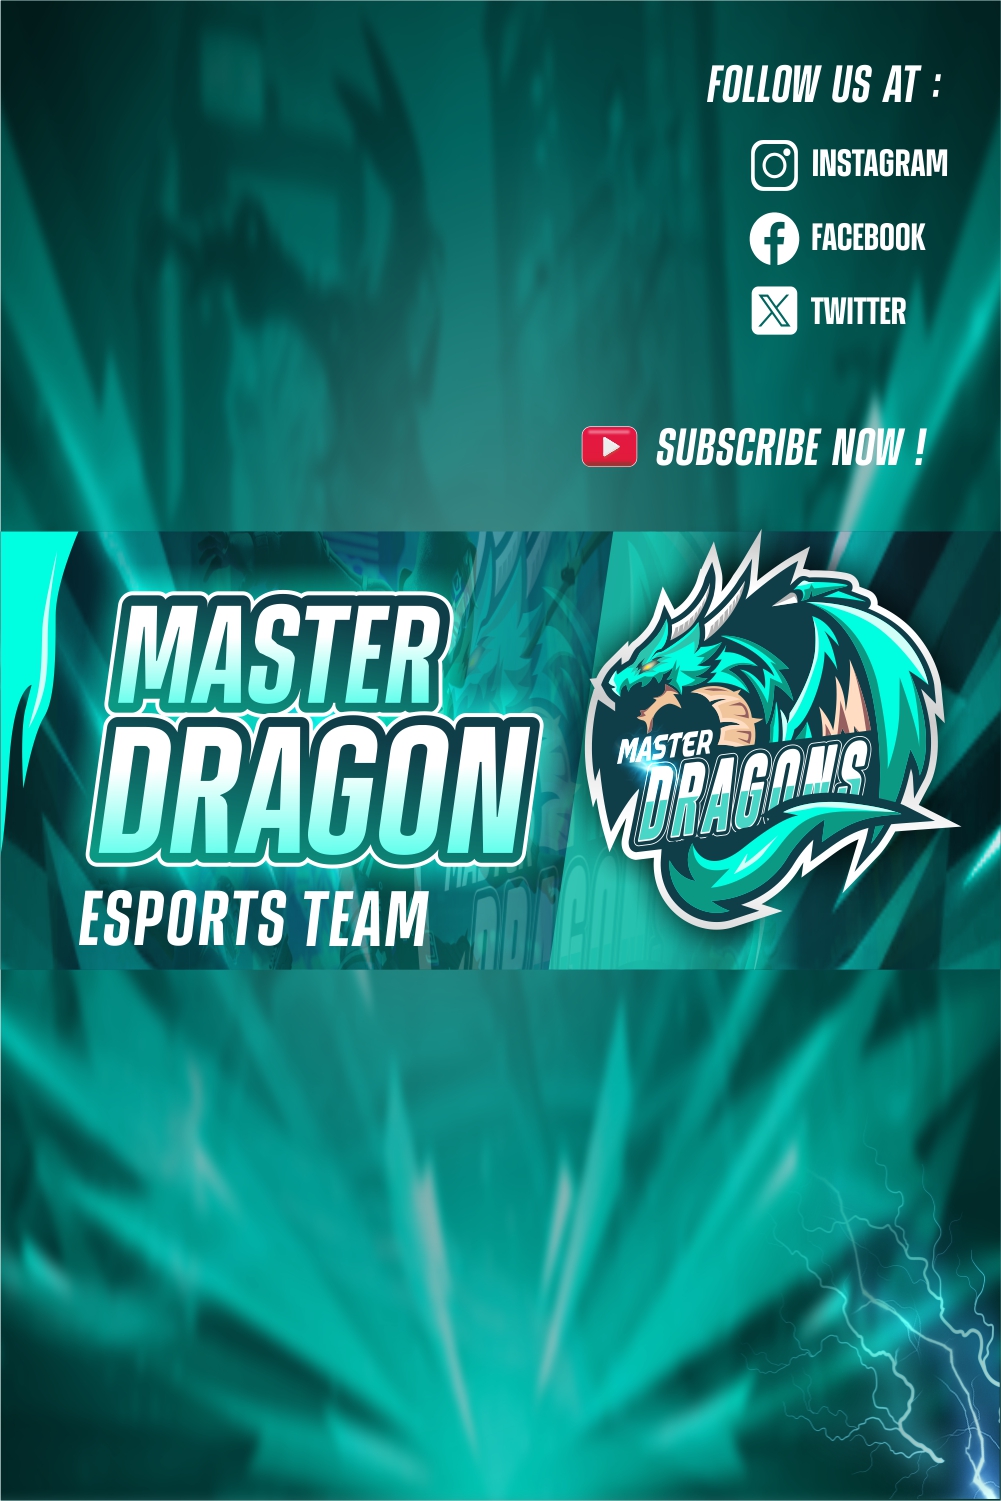 Attractive GAMING LOGO and BANNER named "MASTER DRAGONS" pinterest preview image.